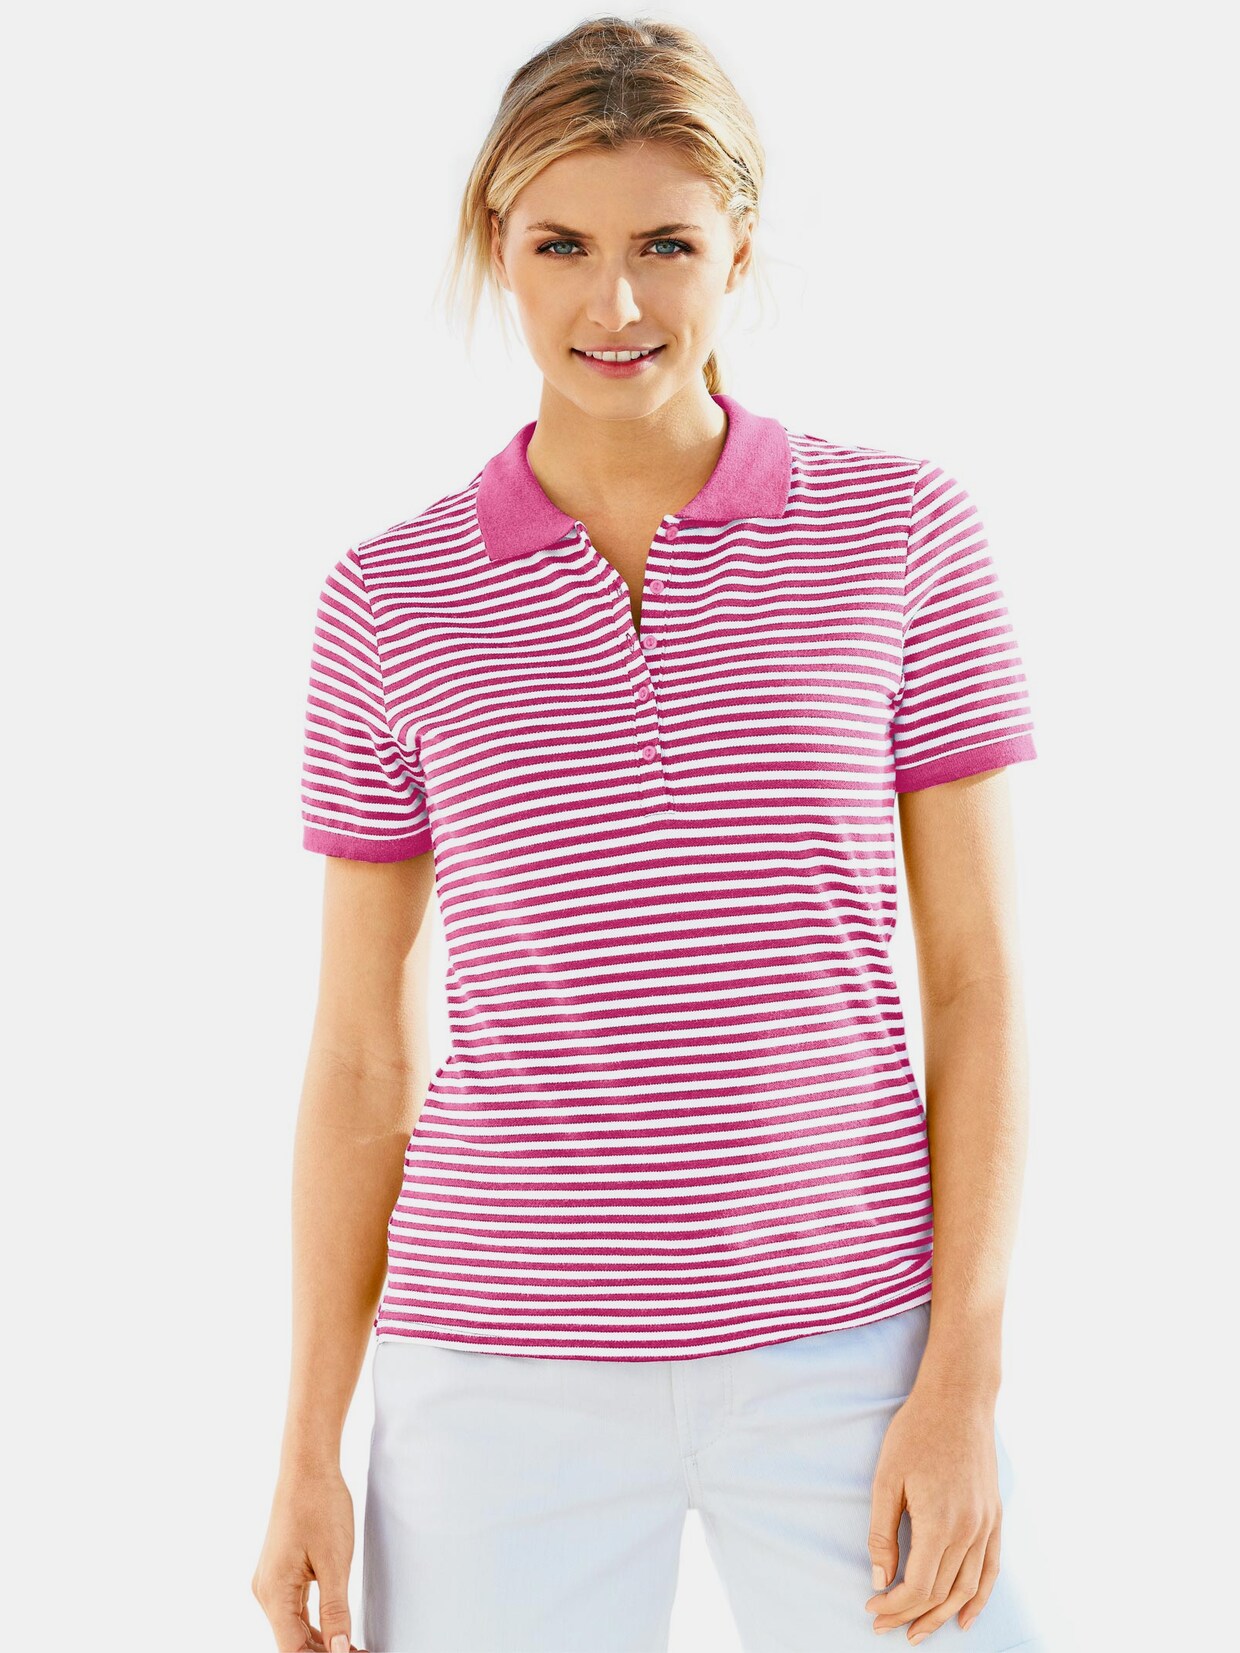 Best Connections Poloshirt - pink